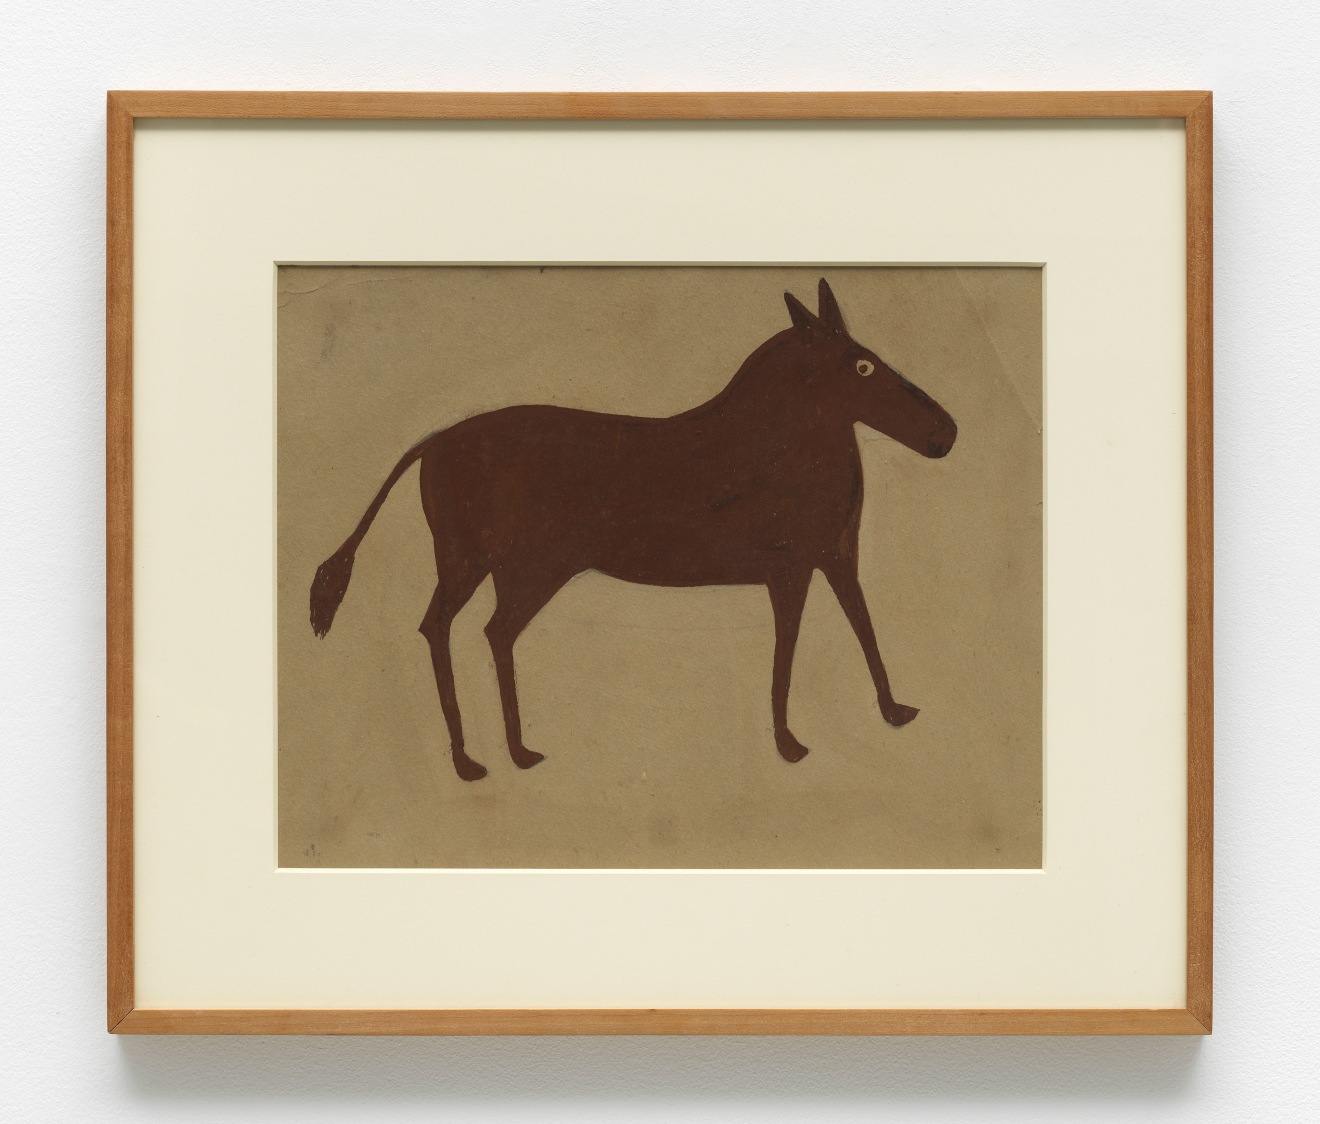 Bill Traylor, Untitled (Brown horse), c. 1939 - 1942